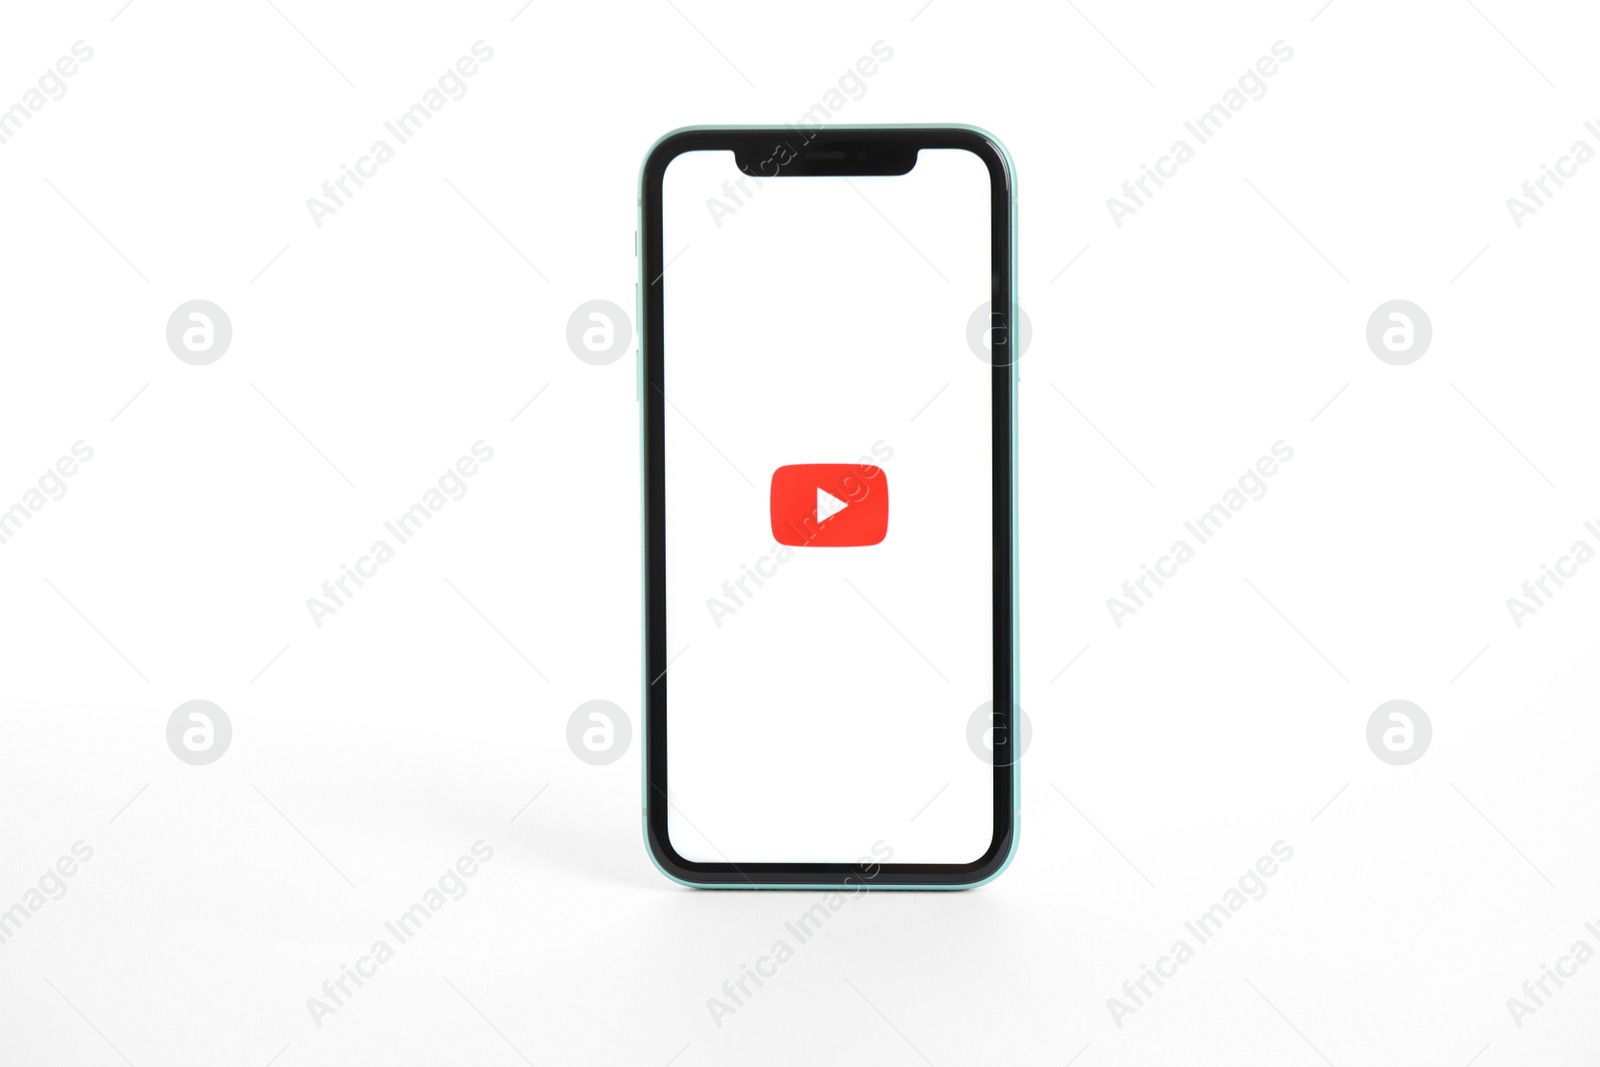 Photo of MYKOLAIV, UKRAINE - JULY 9, 2020: iPhone 11 with Youtube app on screen against white background